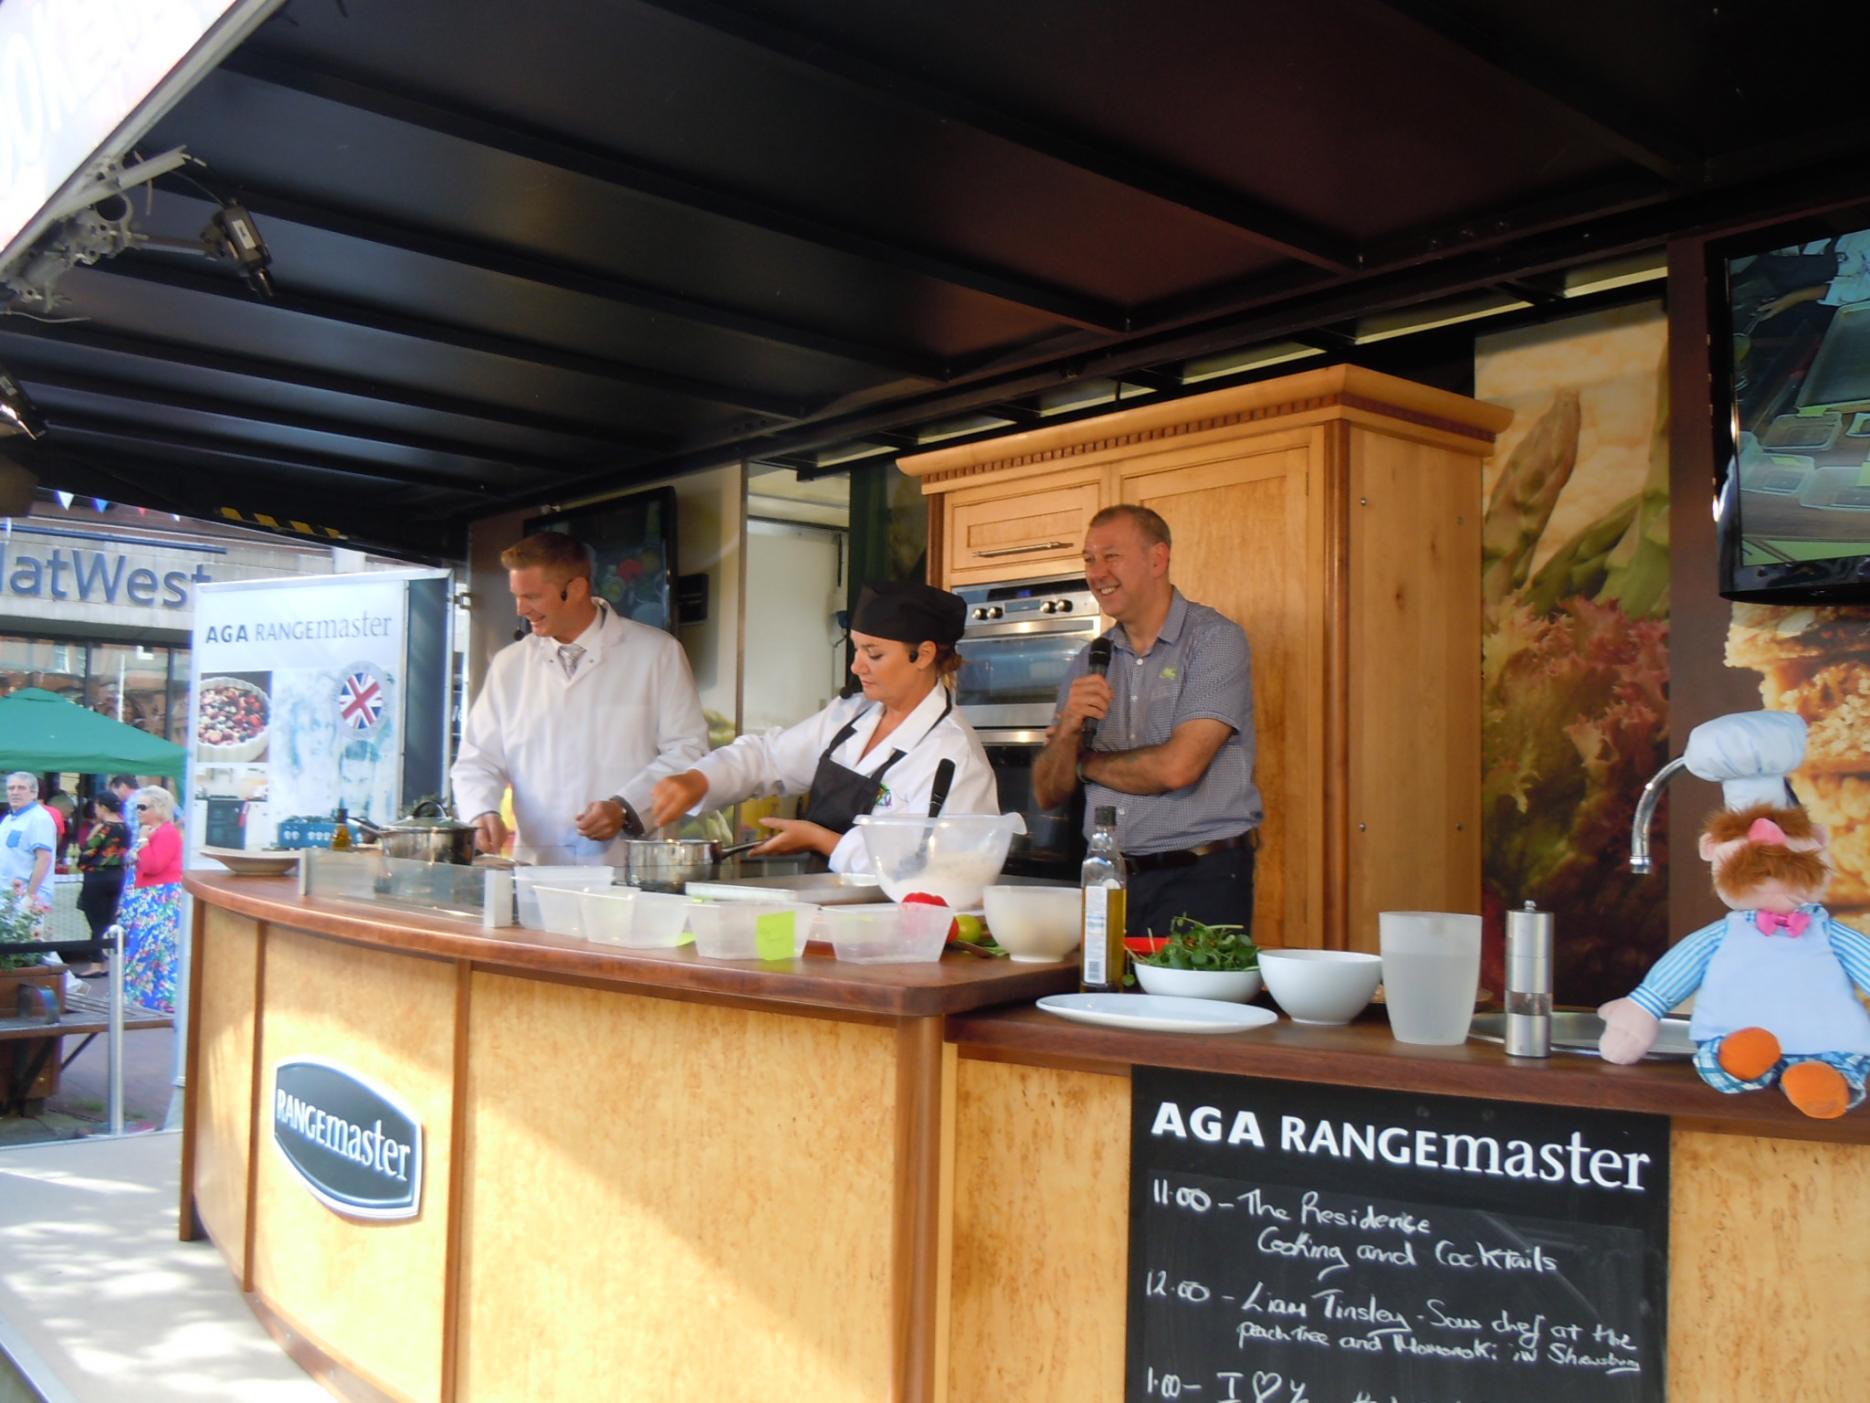 Image of Brian Mellor hosting Food Theatre at the Nantwich festival